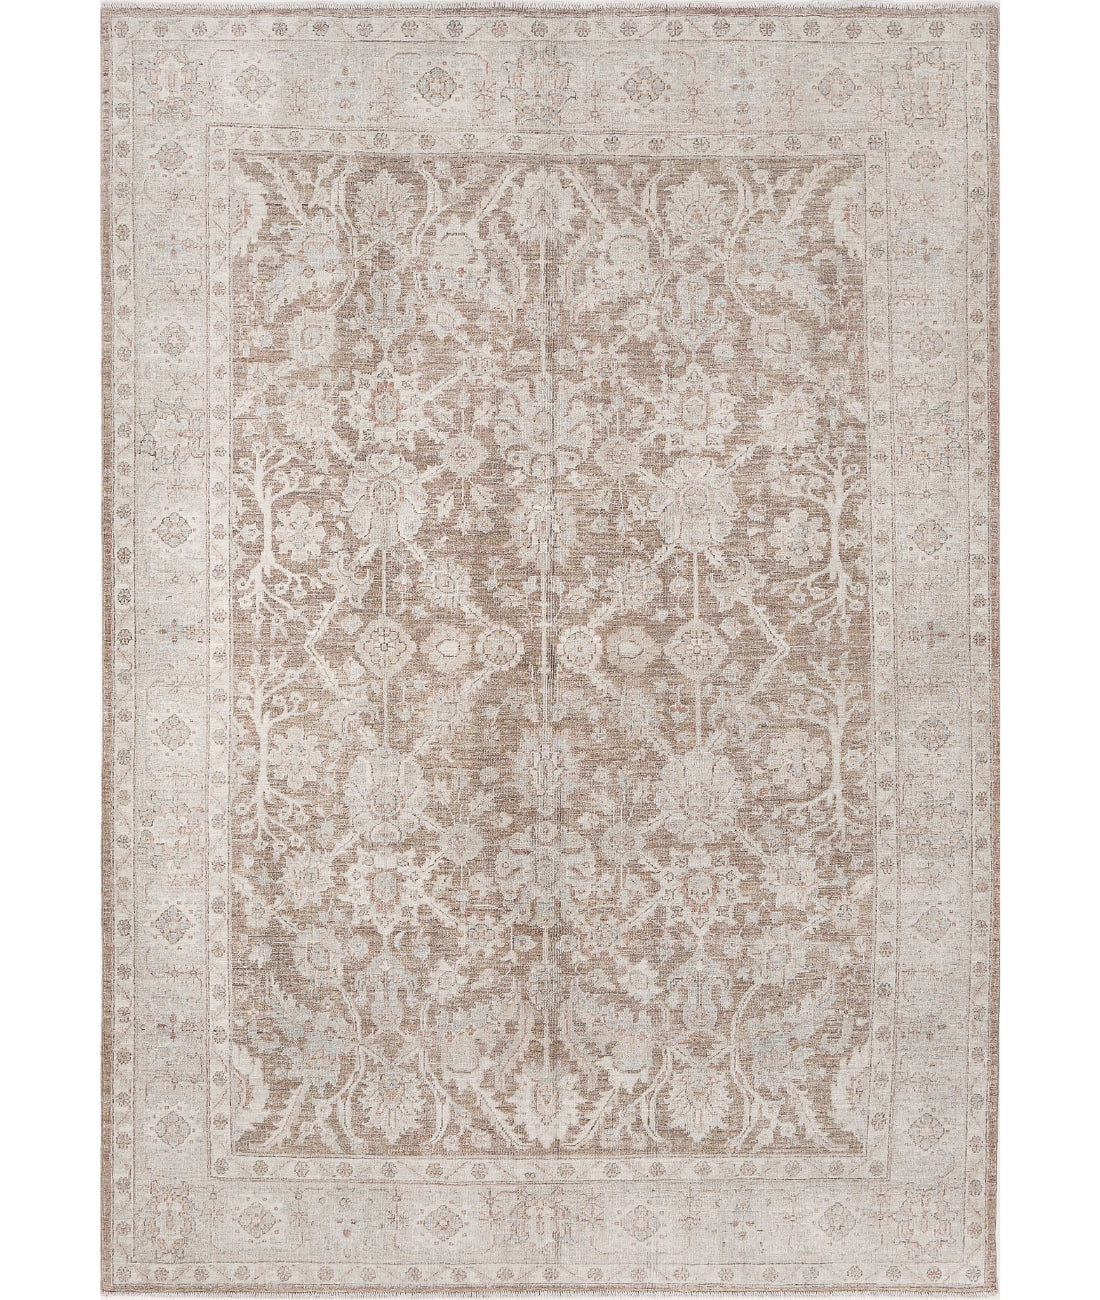 Hand Knotted Serenity Wool Rug - 6&#39;2&#39;&#39; x 8&#39;9&#39;&#39; 6&#39;2&#39;&#39; x 8&#39;9&#39;&#39; (185 X 263) / Brown / Ivory